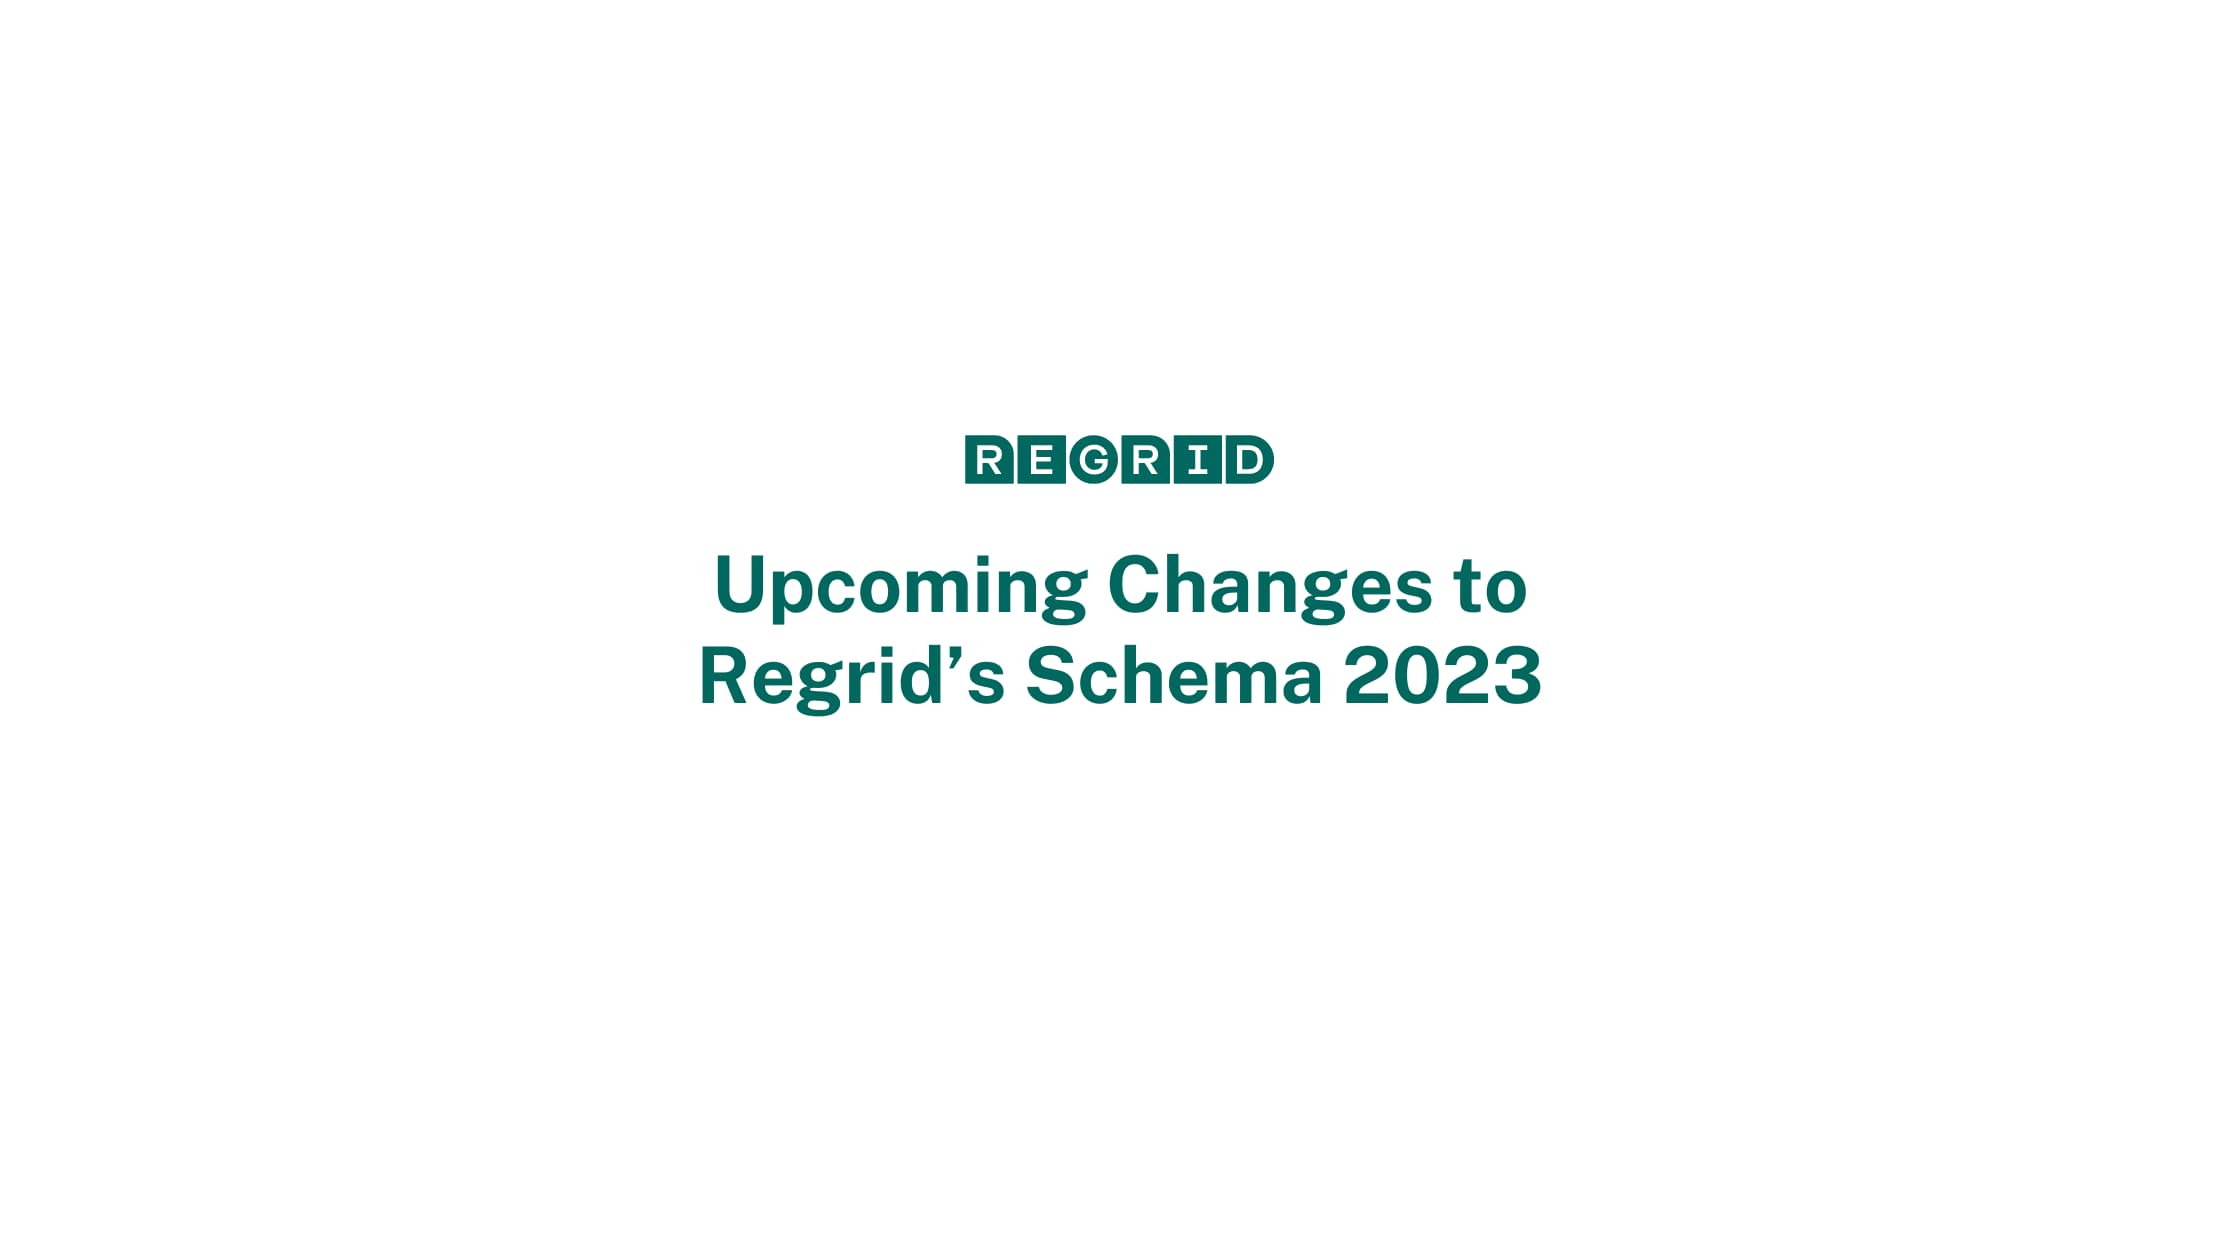 Upcoming Changes to Regrid's Schema 2023